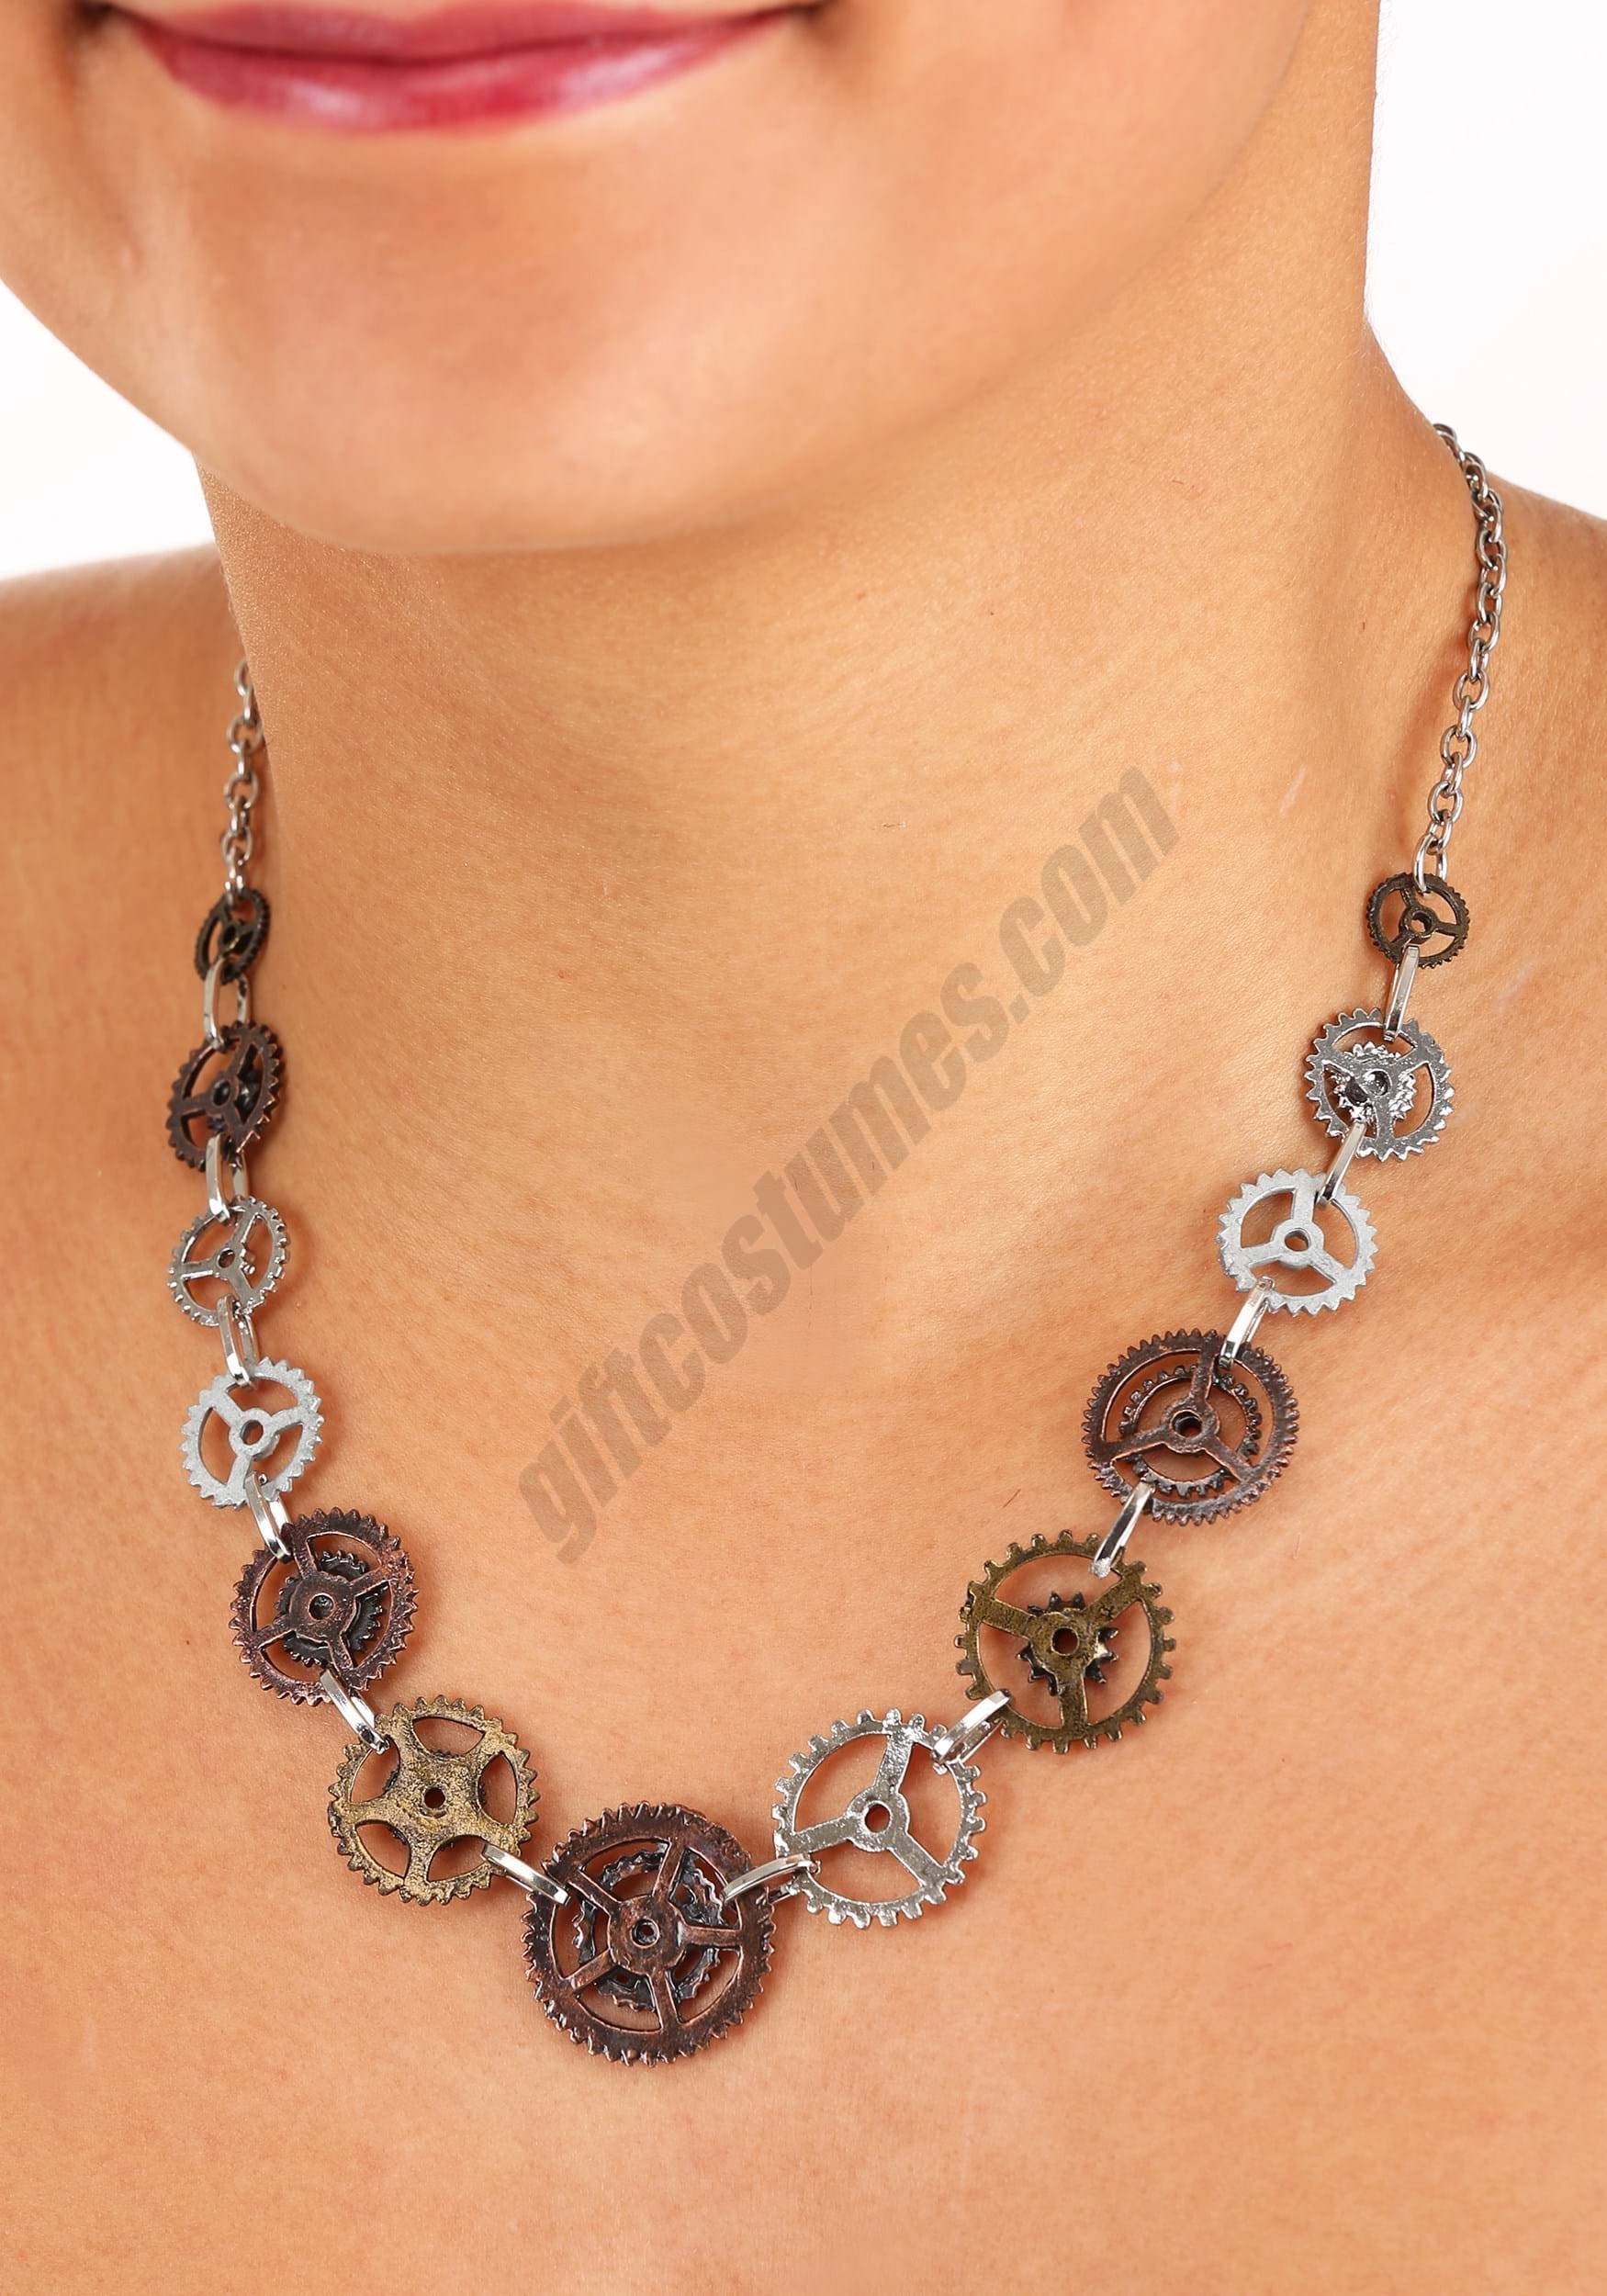 Single Chain Gears Necklace Promotions - Single Chain Gears Necklace Promotions